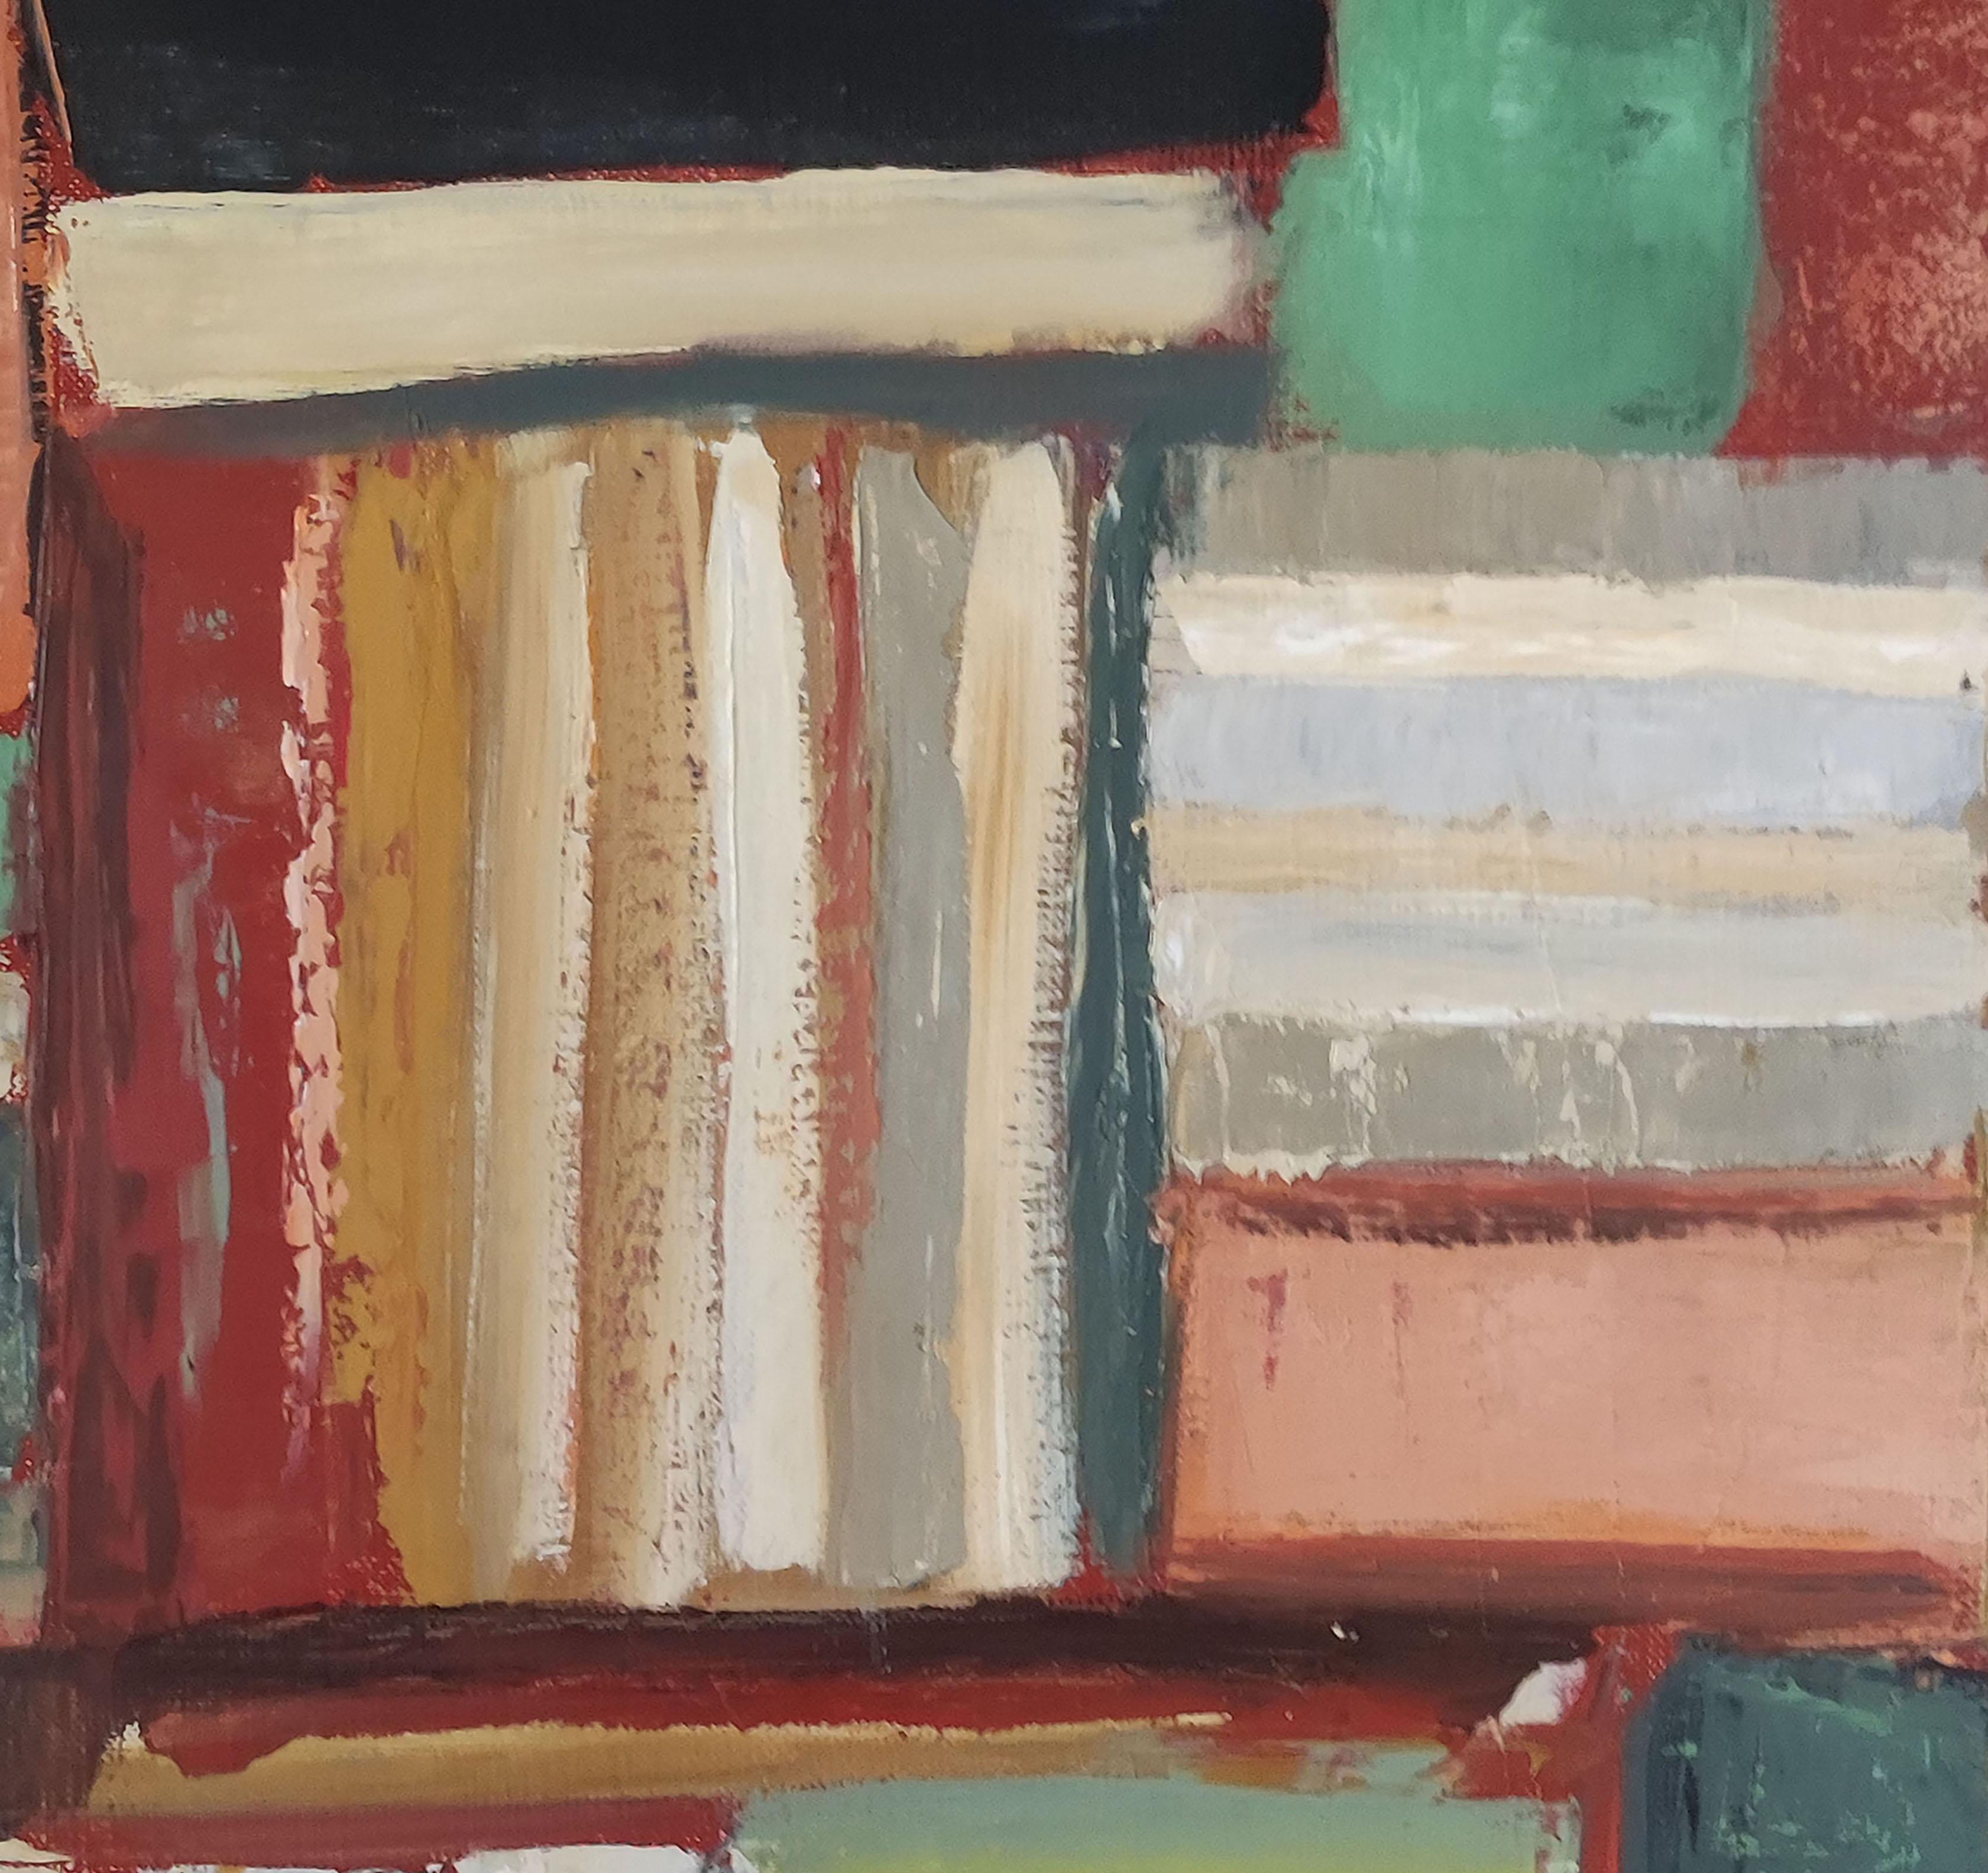 chromatic, colored abstract, books, oil on canvas, expressionism, geometric  5